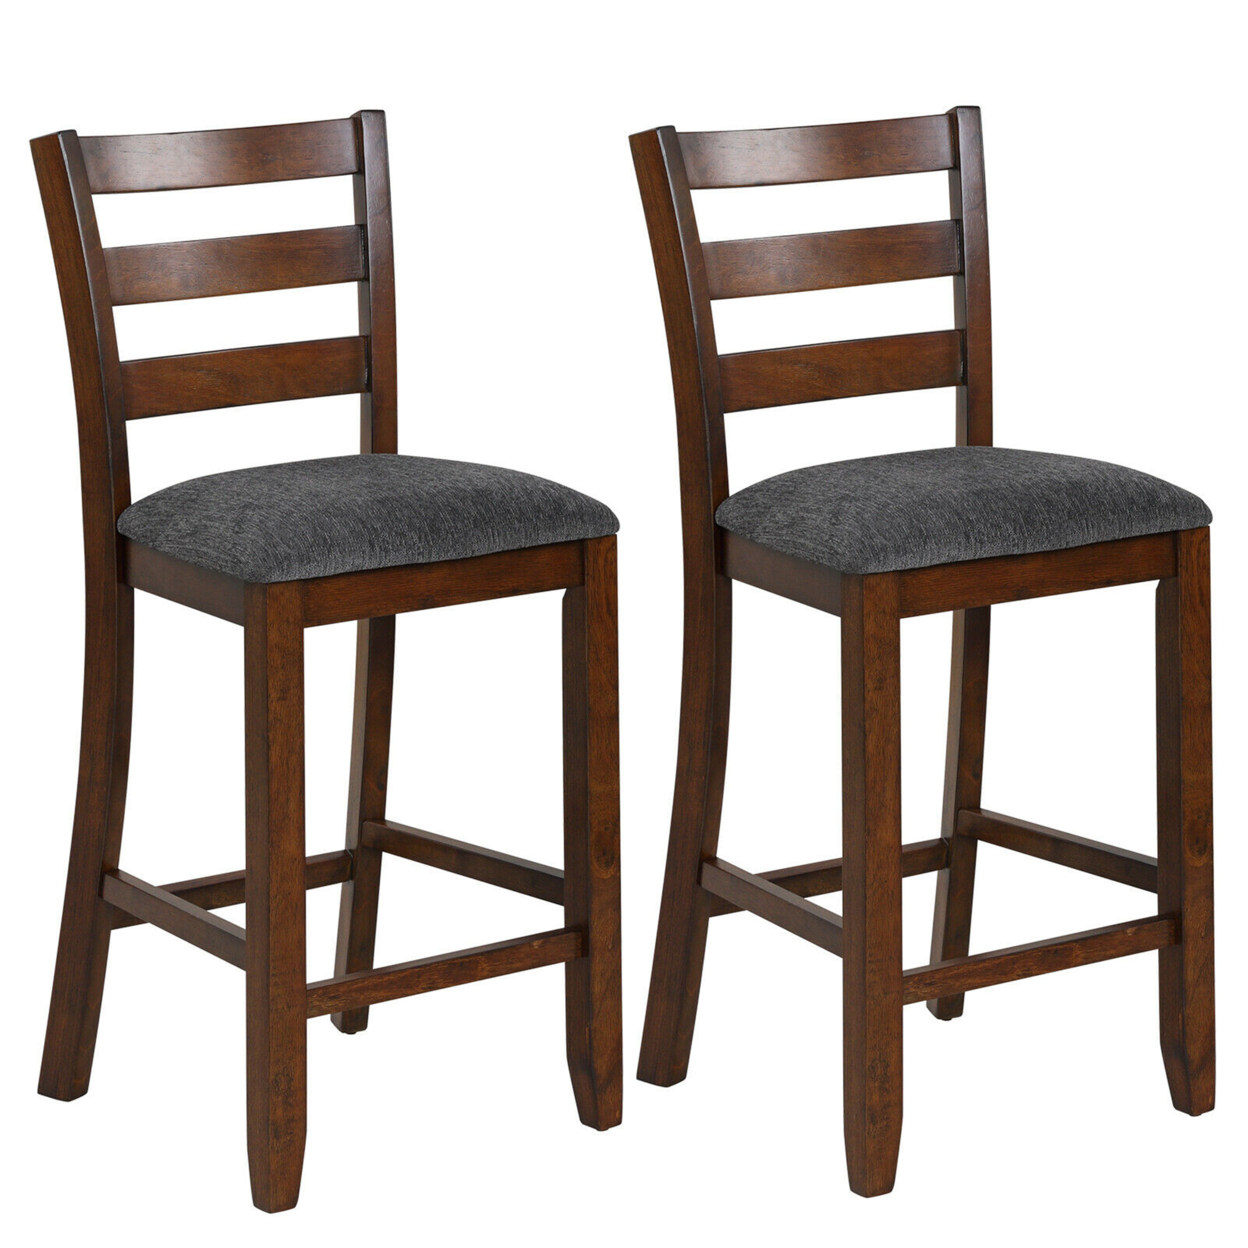 Set Of 2 Barstools Counter Height Chairs W/Fabric Seat & Rubber Wood Legs